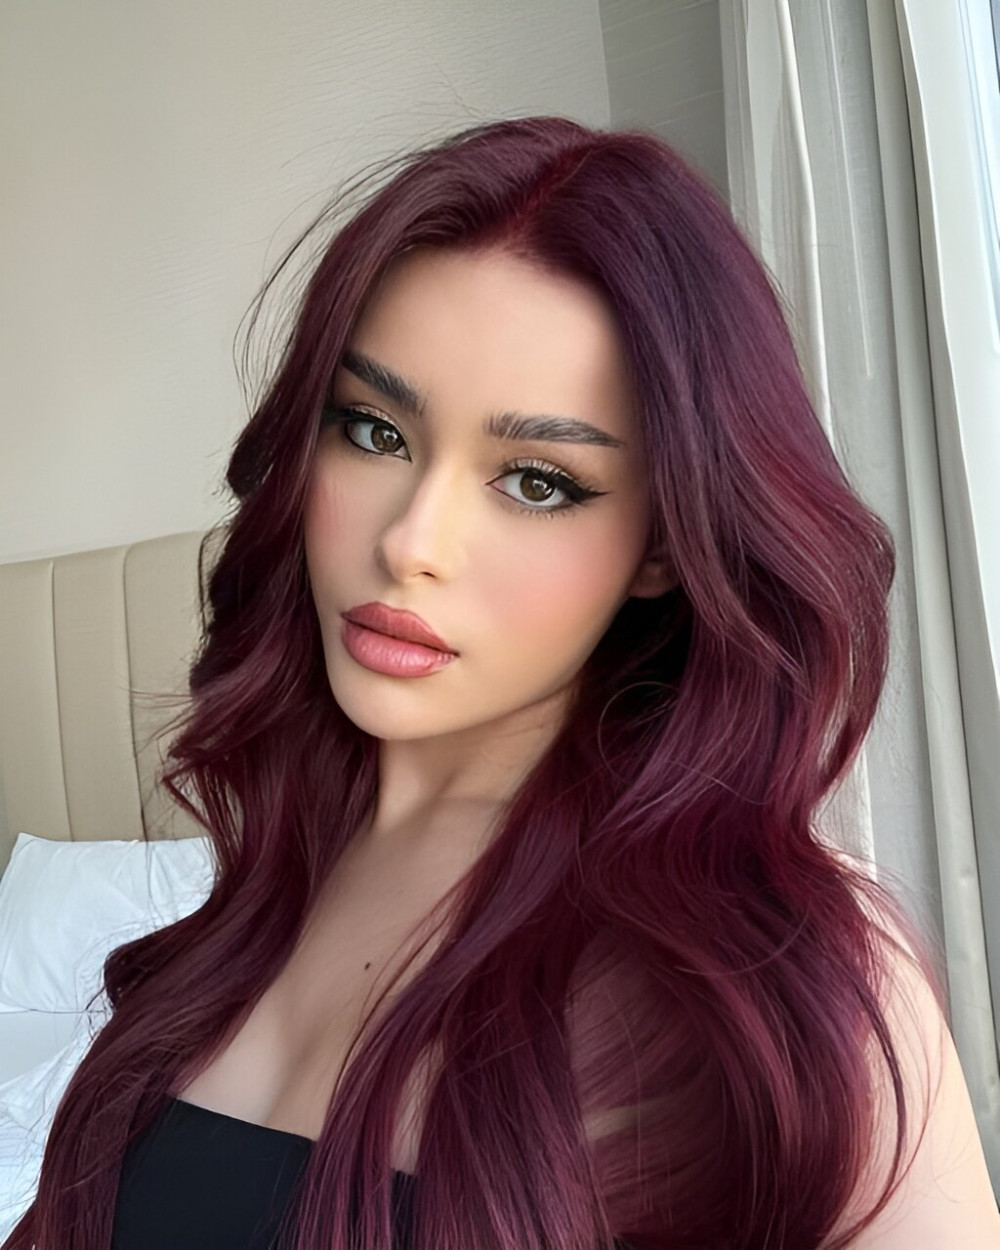 Become A Model With These 27 Gorgeous Plum Hair Color Ideas - 181